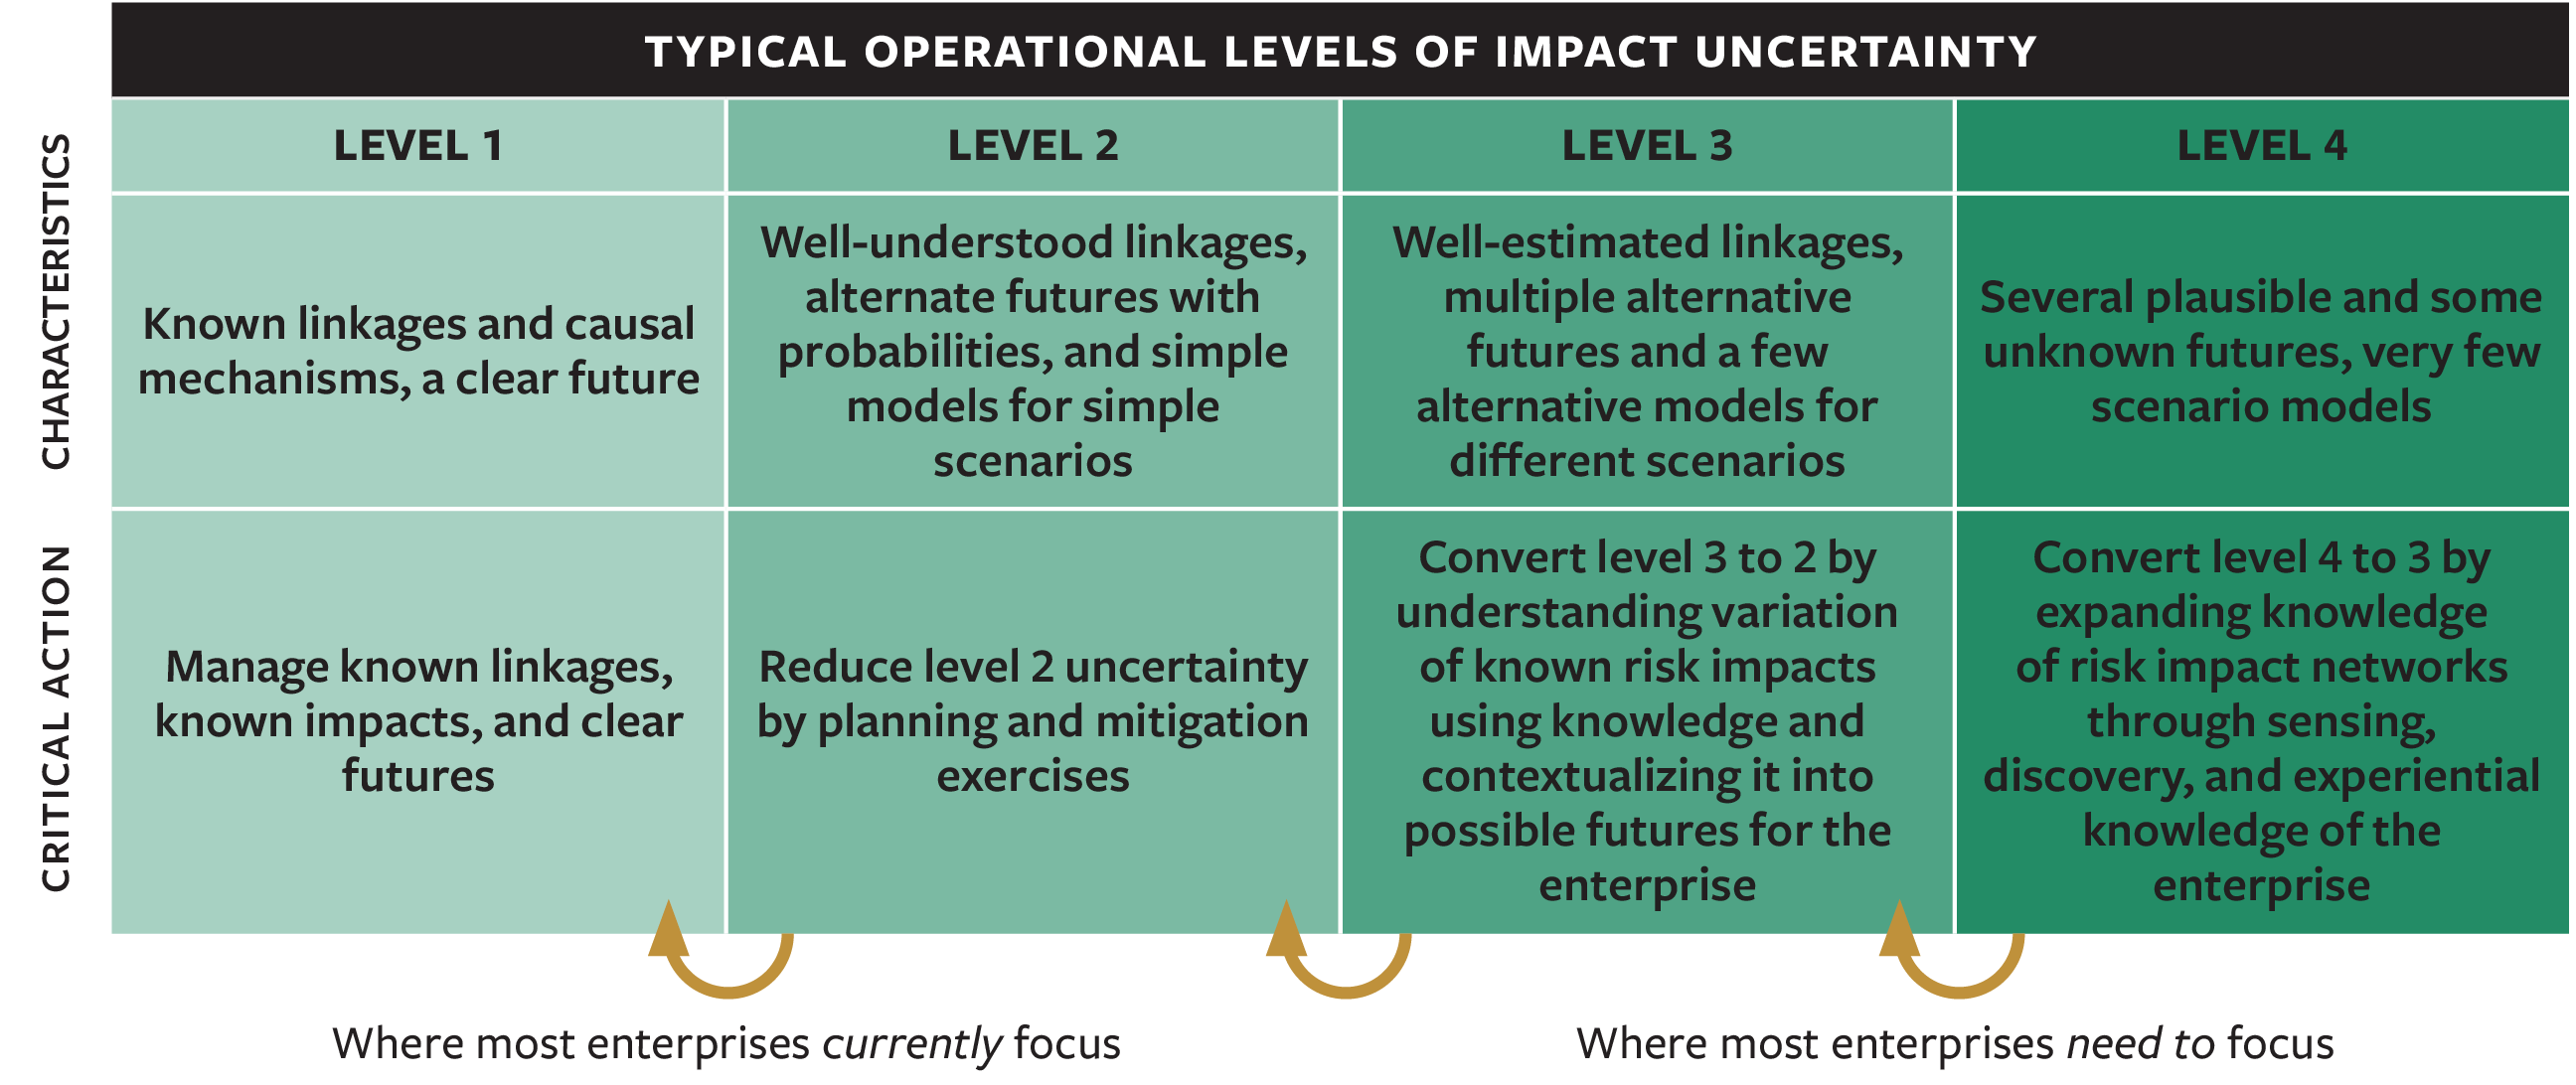 Managing Levels of Impact Uncertainty